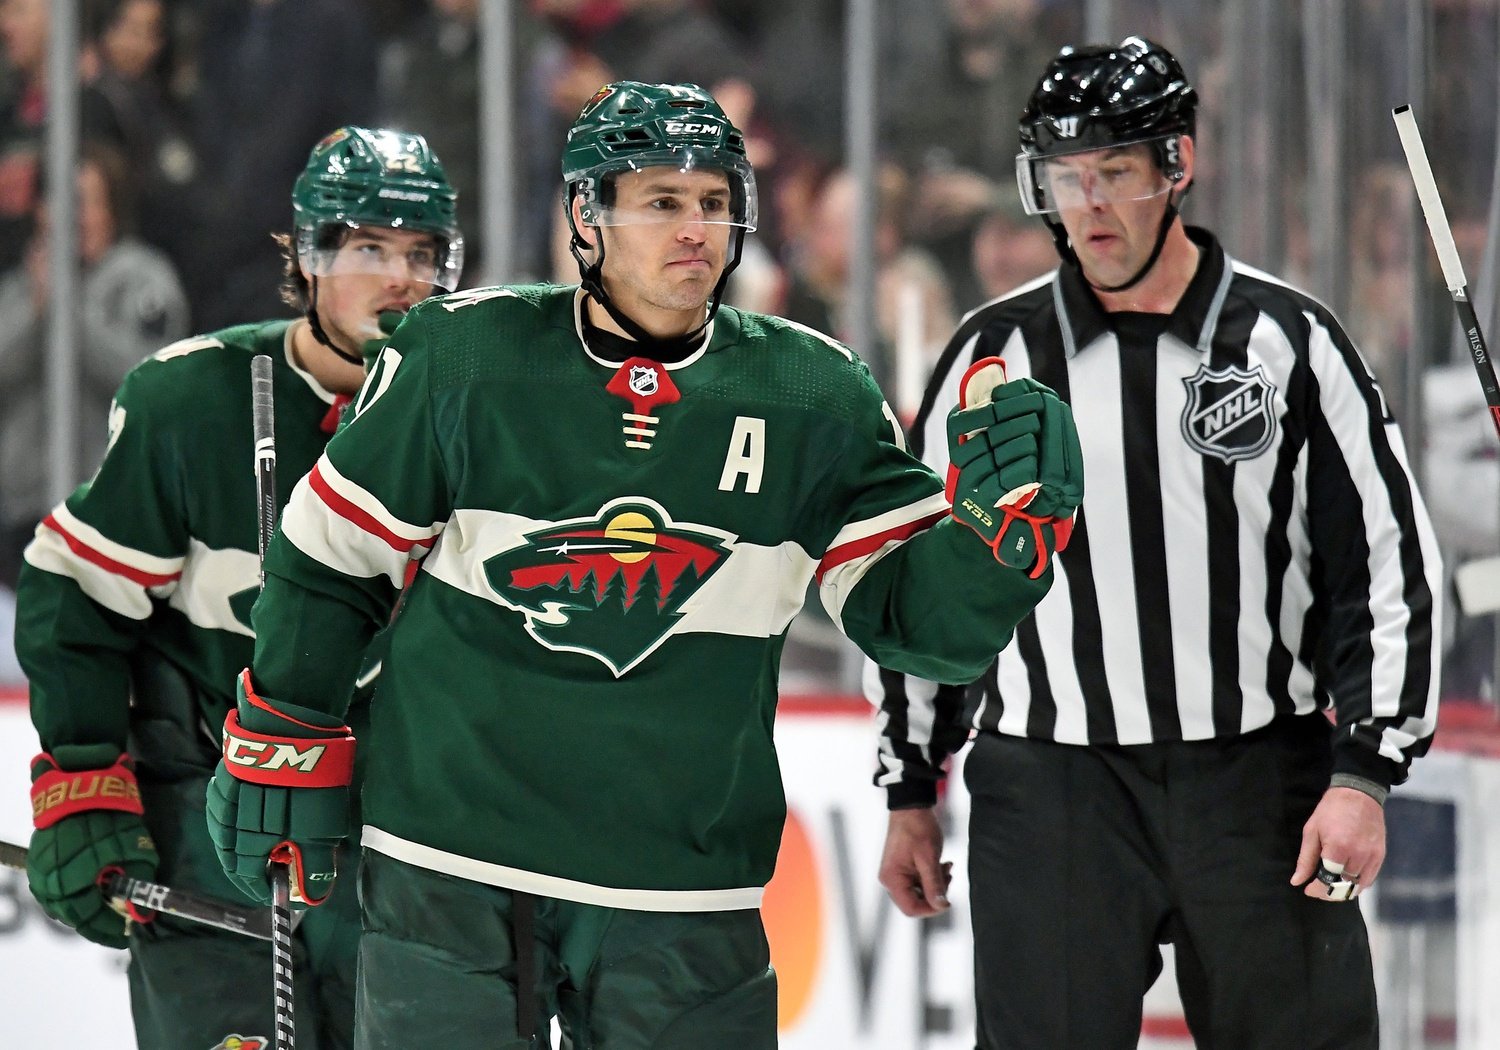 Ryan Suter on Zach Parise: As a friend, it's awful. As a team, it